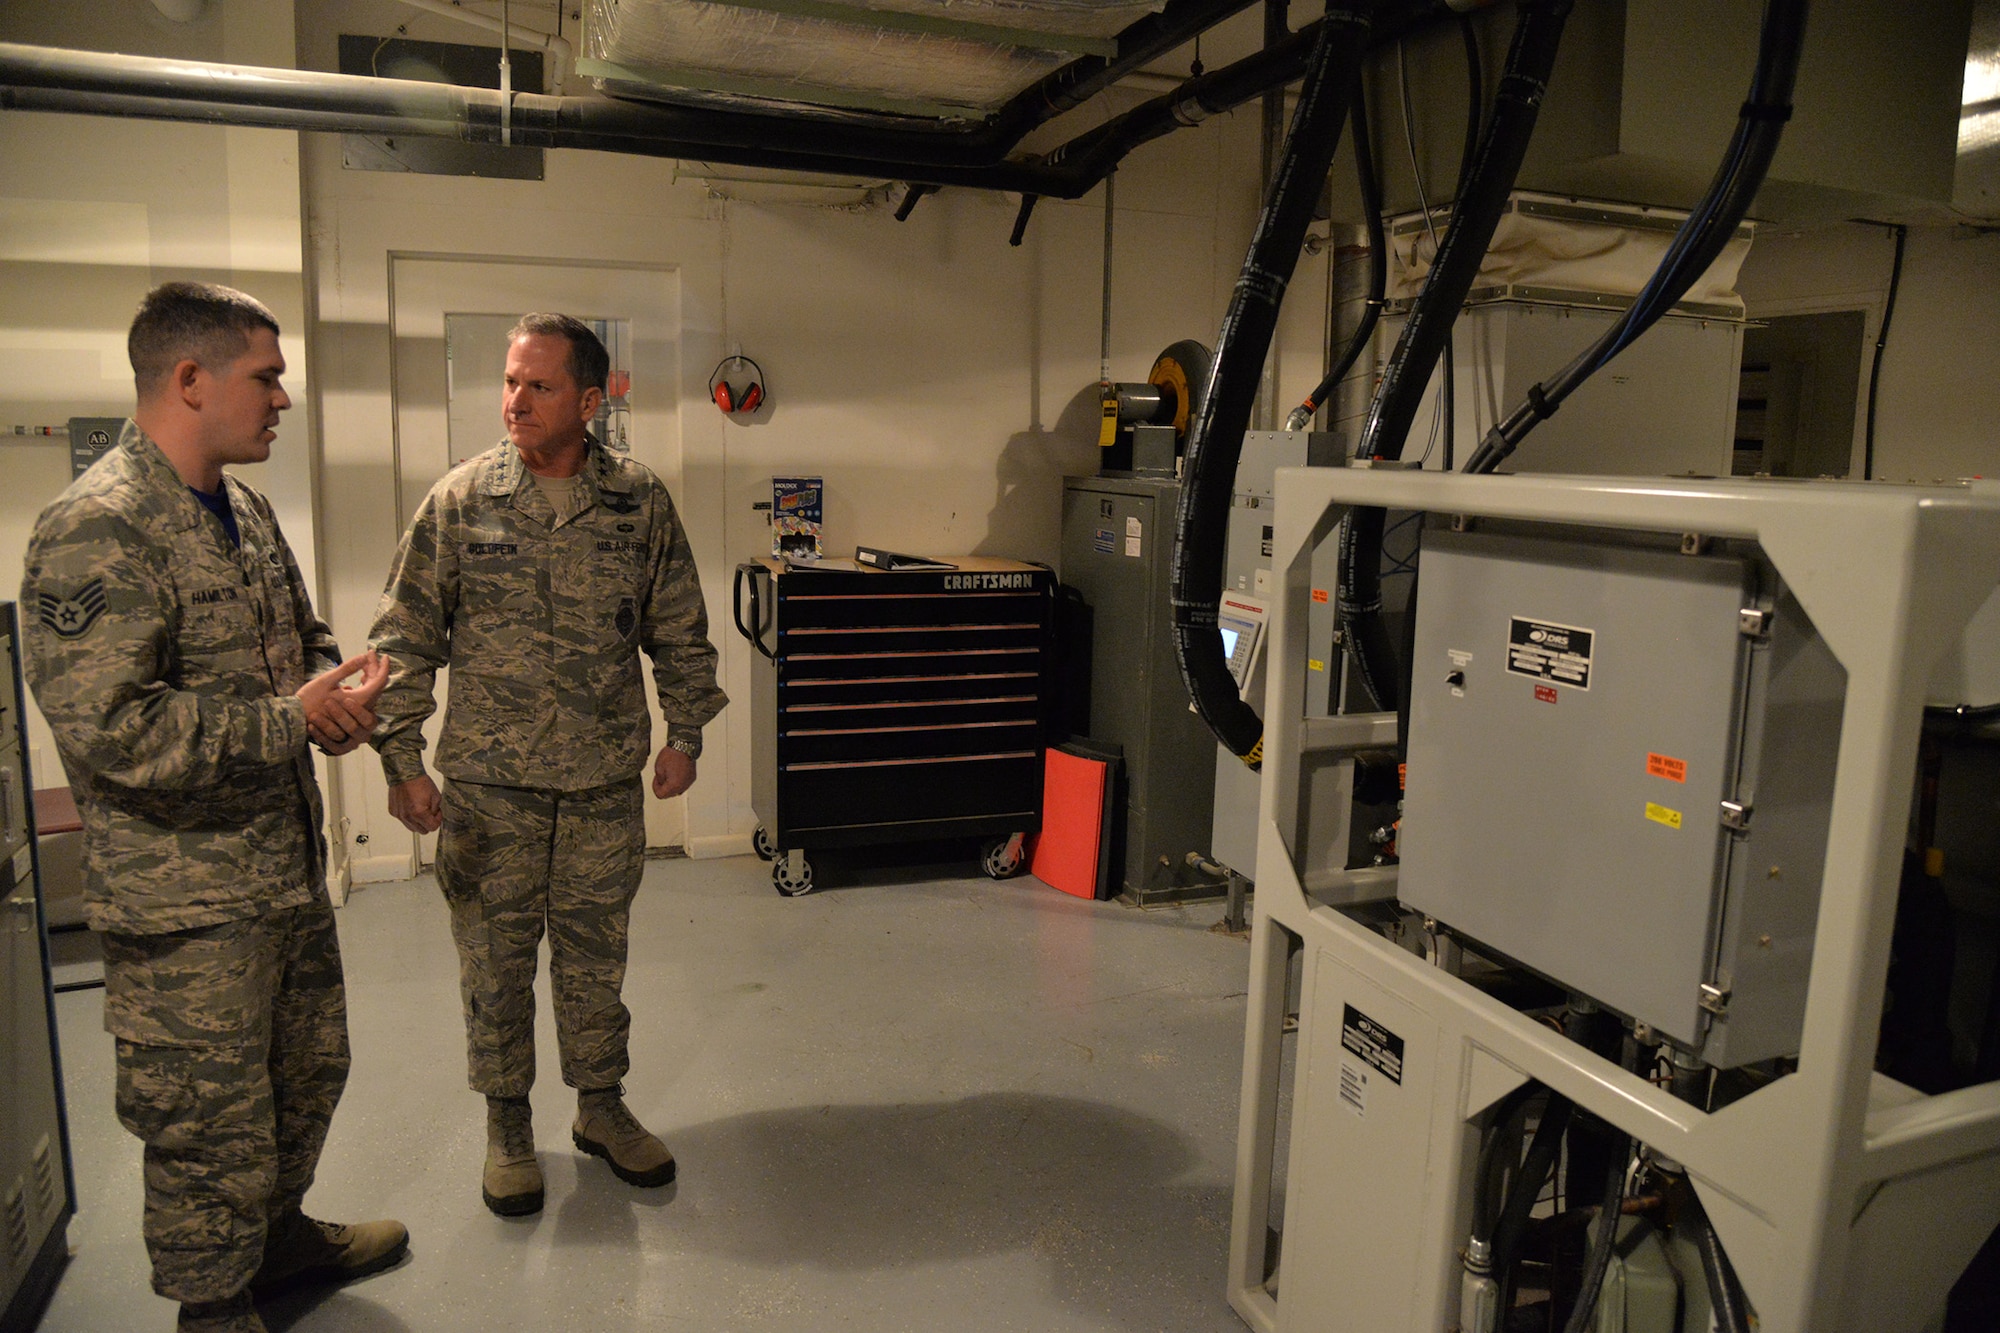 Chief of Staff of the Air Force Gen. David L. Goldfein and Staff Sgt. Geoff Hamilton, 10th Missile Squadron facility manager, tour a missile alert facility Oct. 20, 2017, located in the missile complex of Malmstrom Air Force Base, Mont.